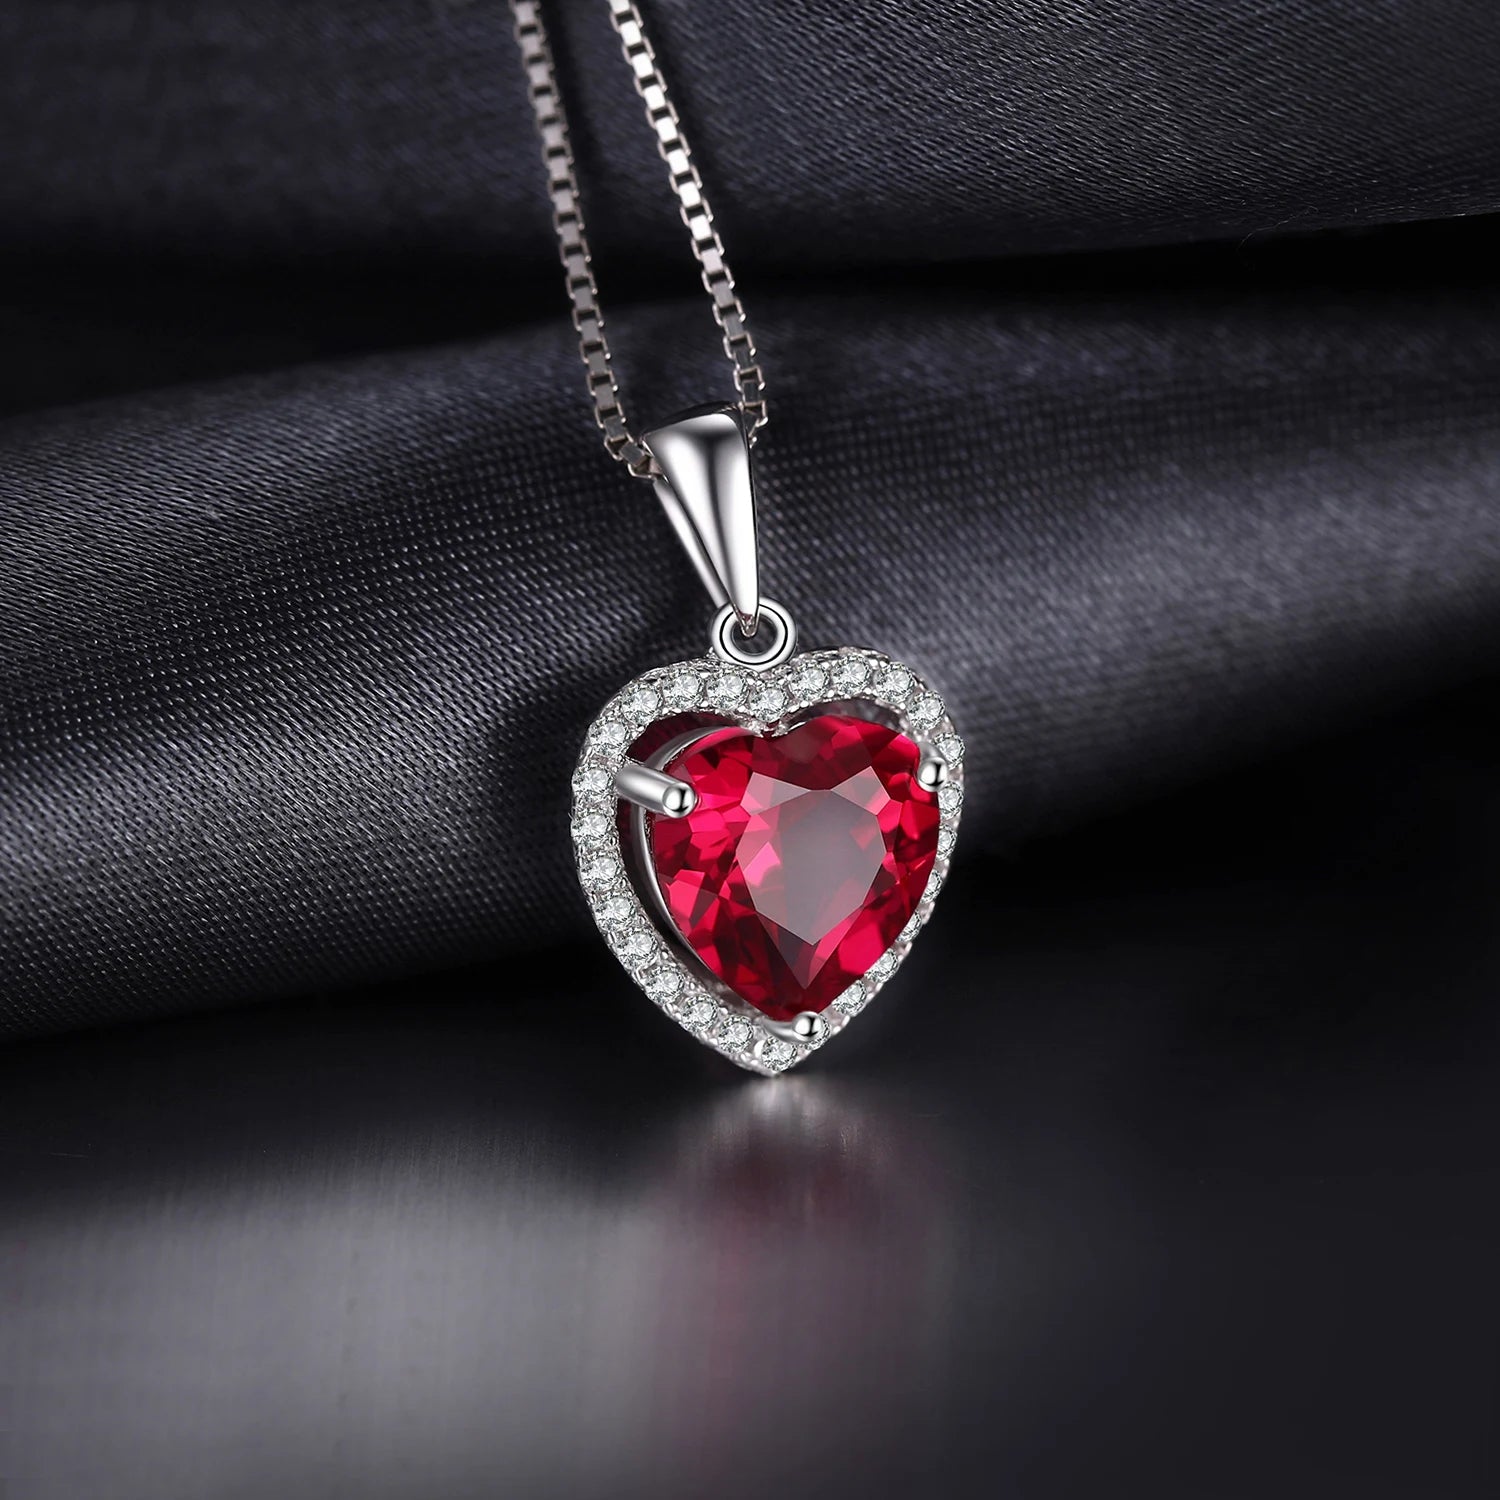 Heart Love 3.6ct Created Ruby 925 Sterling Silver Pendant Necklace for Women No Chain Fashion Fine Jewelry Gift